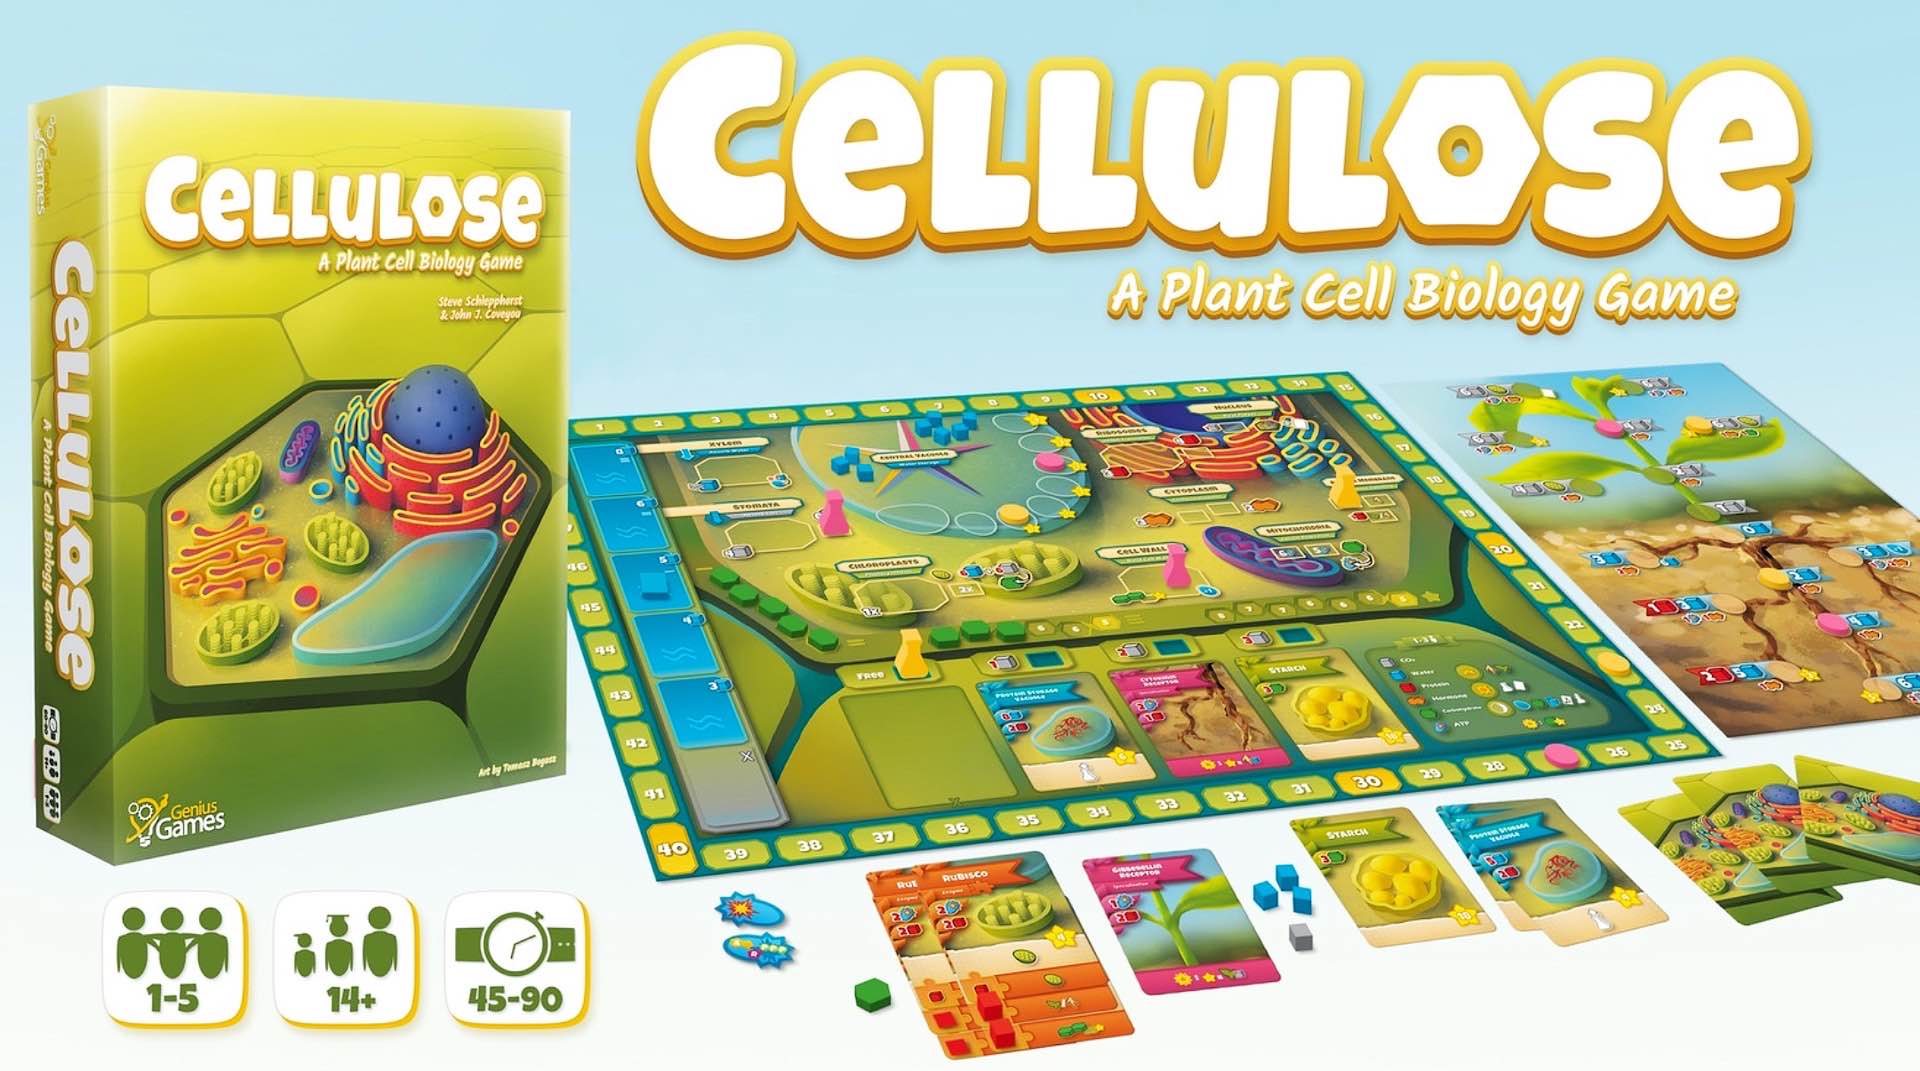 cellulose-a-plant-cell-biology-game-by-genius-games